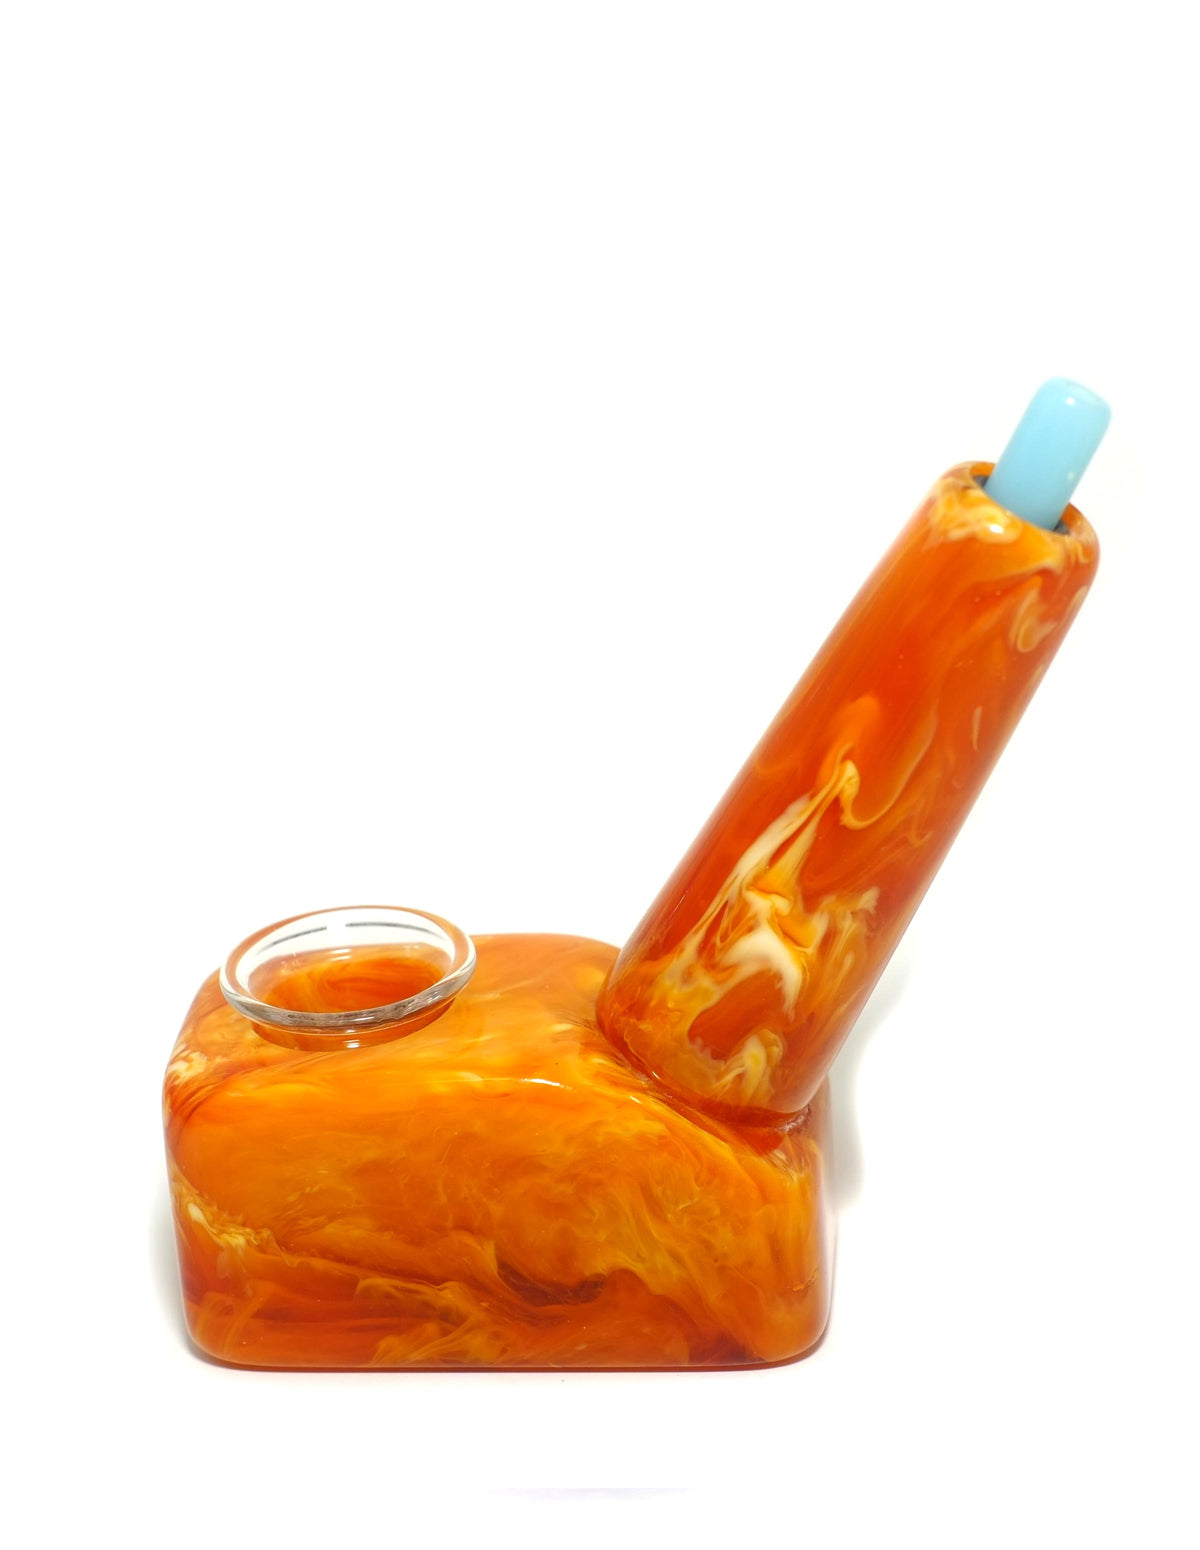 4"Tobacco Pipe Resin Smoking Pipe with Glass Bowl